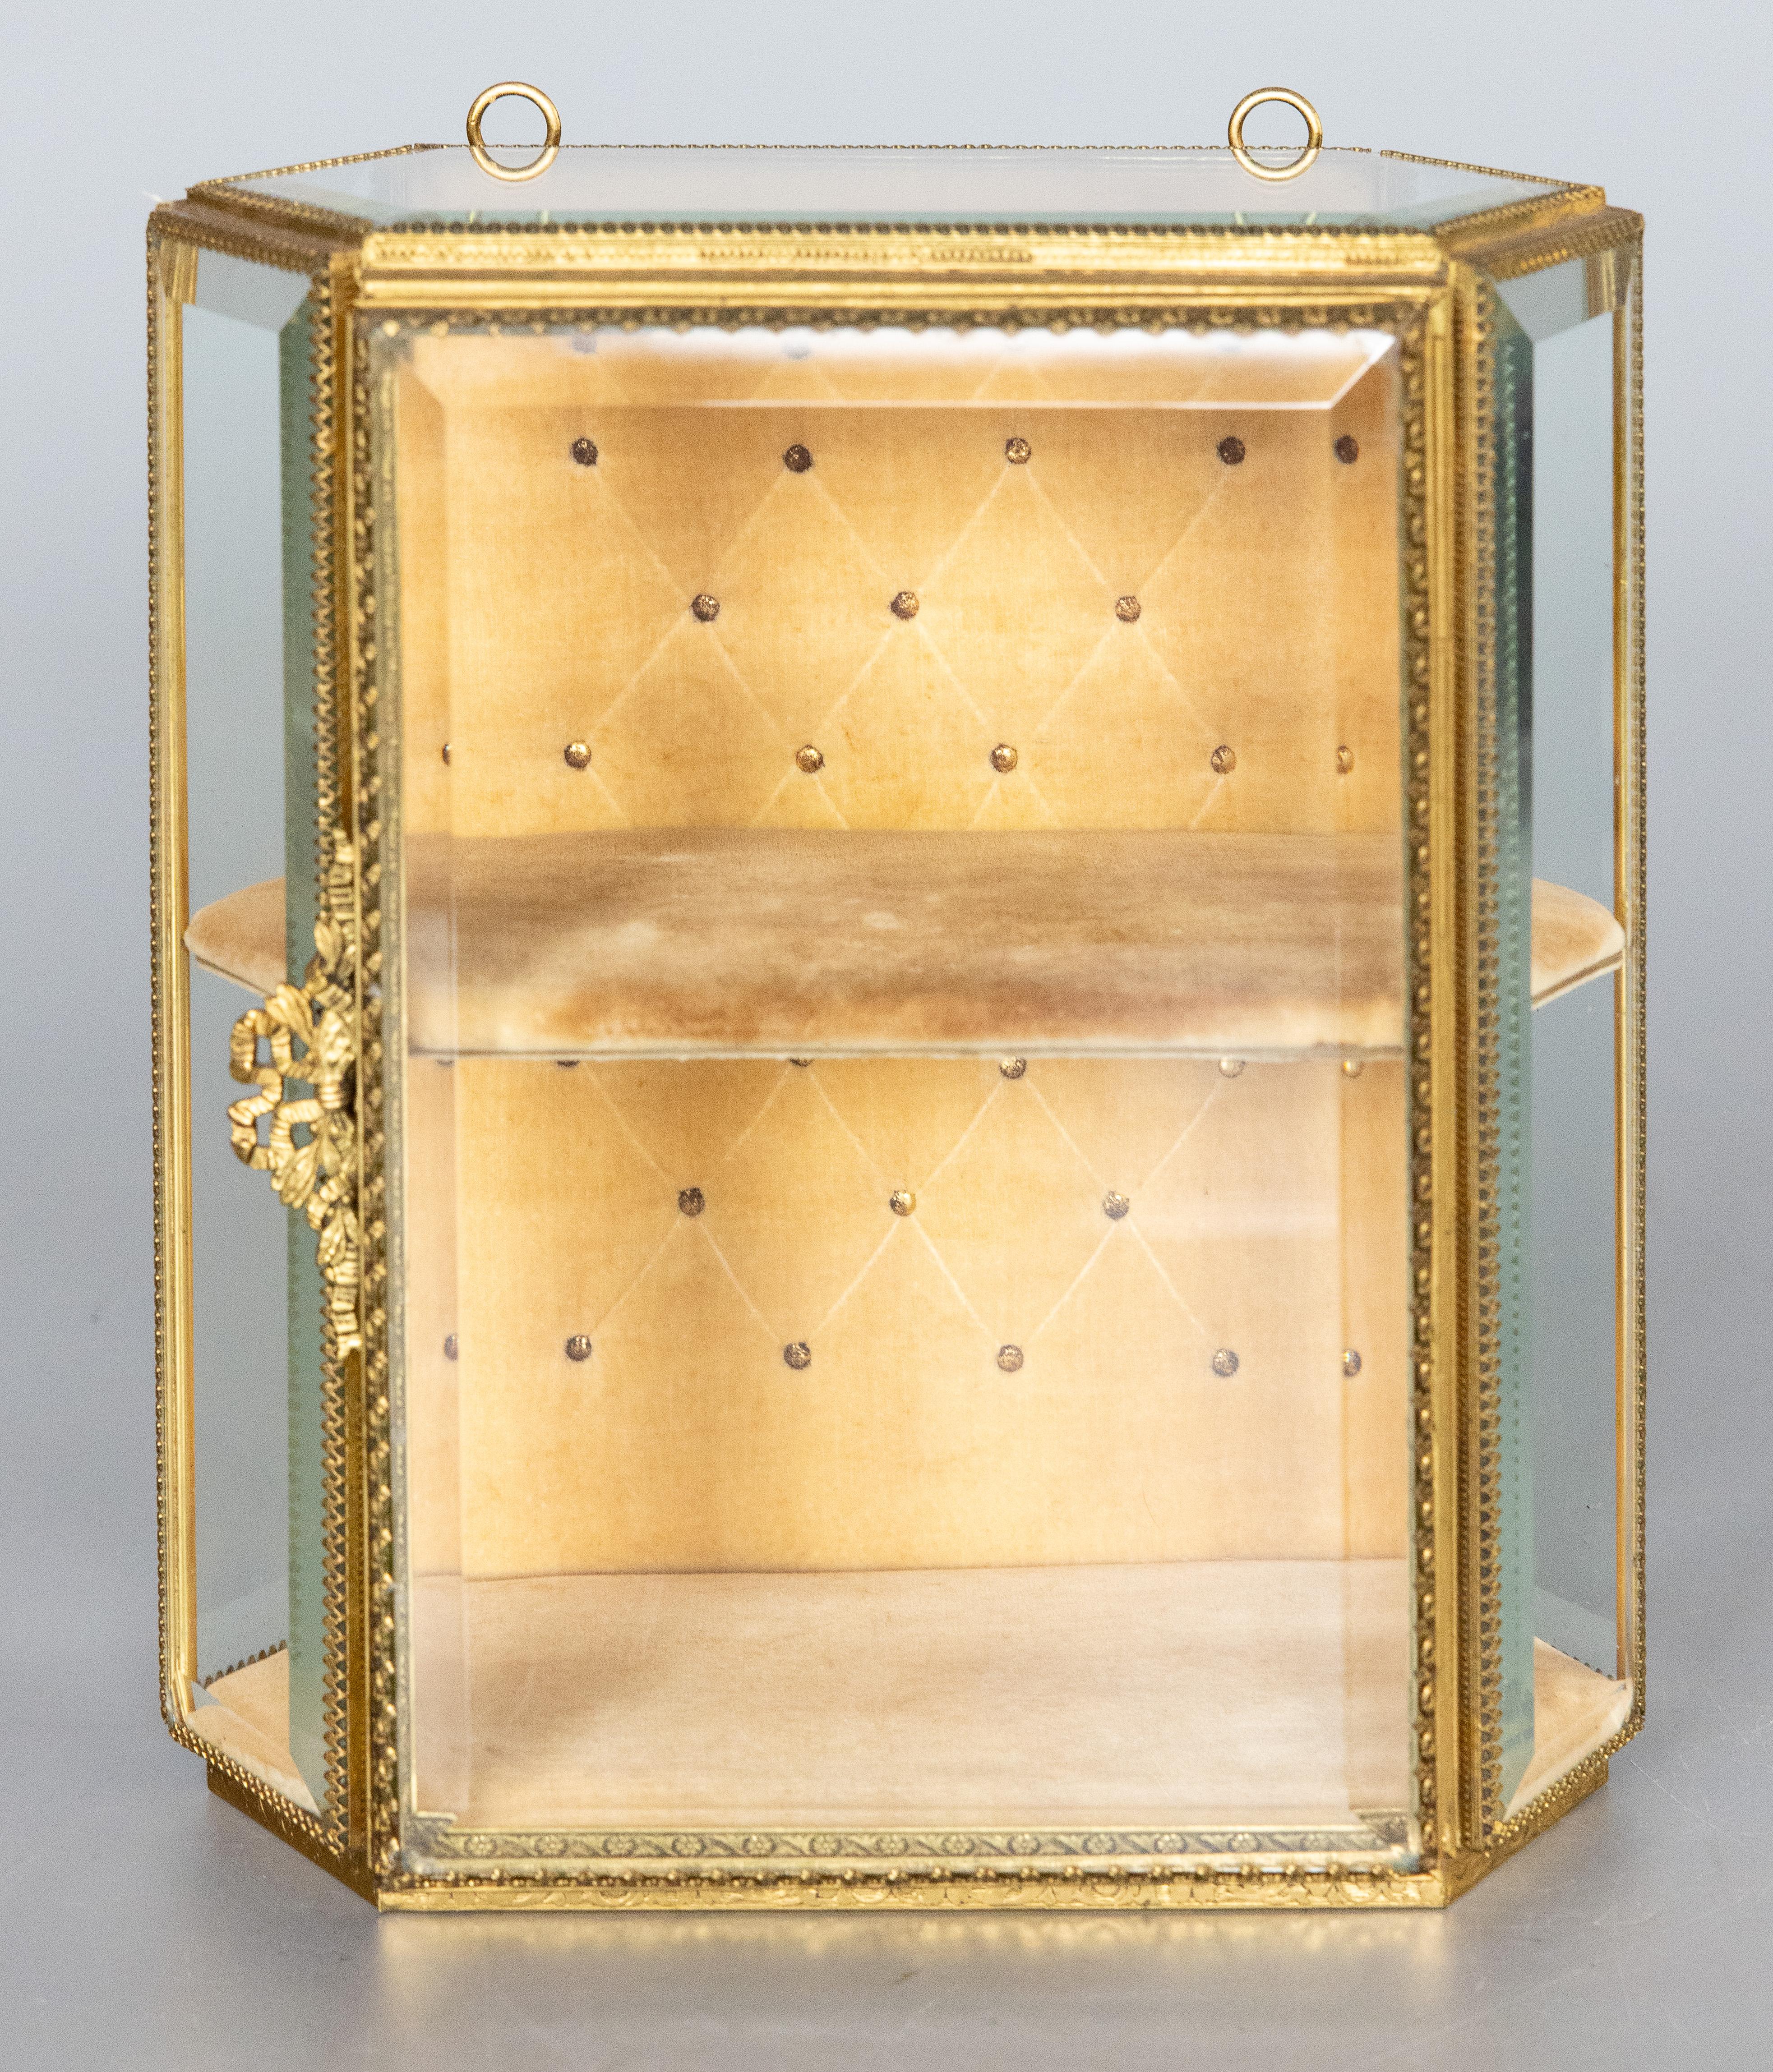 Large French Ormolu & Glass Hanging Wall Jewelry Casket Box, circa 1900 For Sale 6